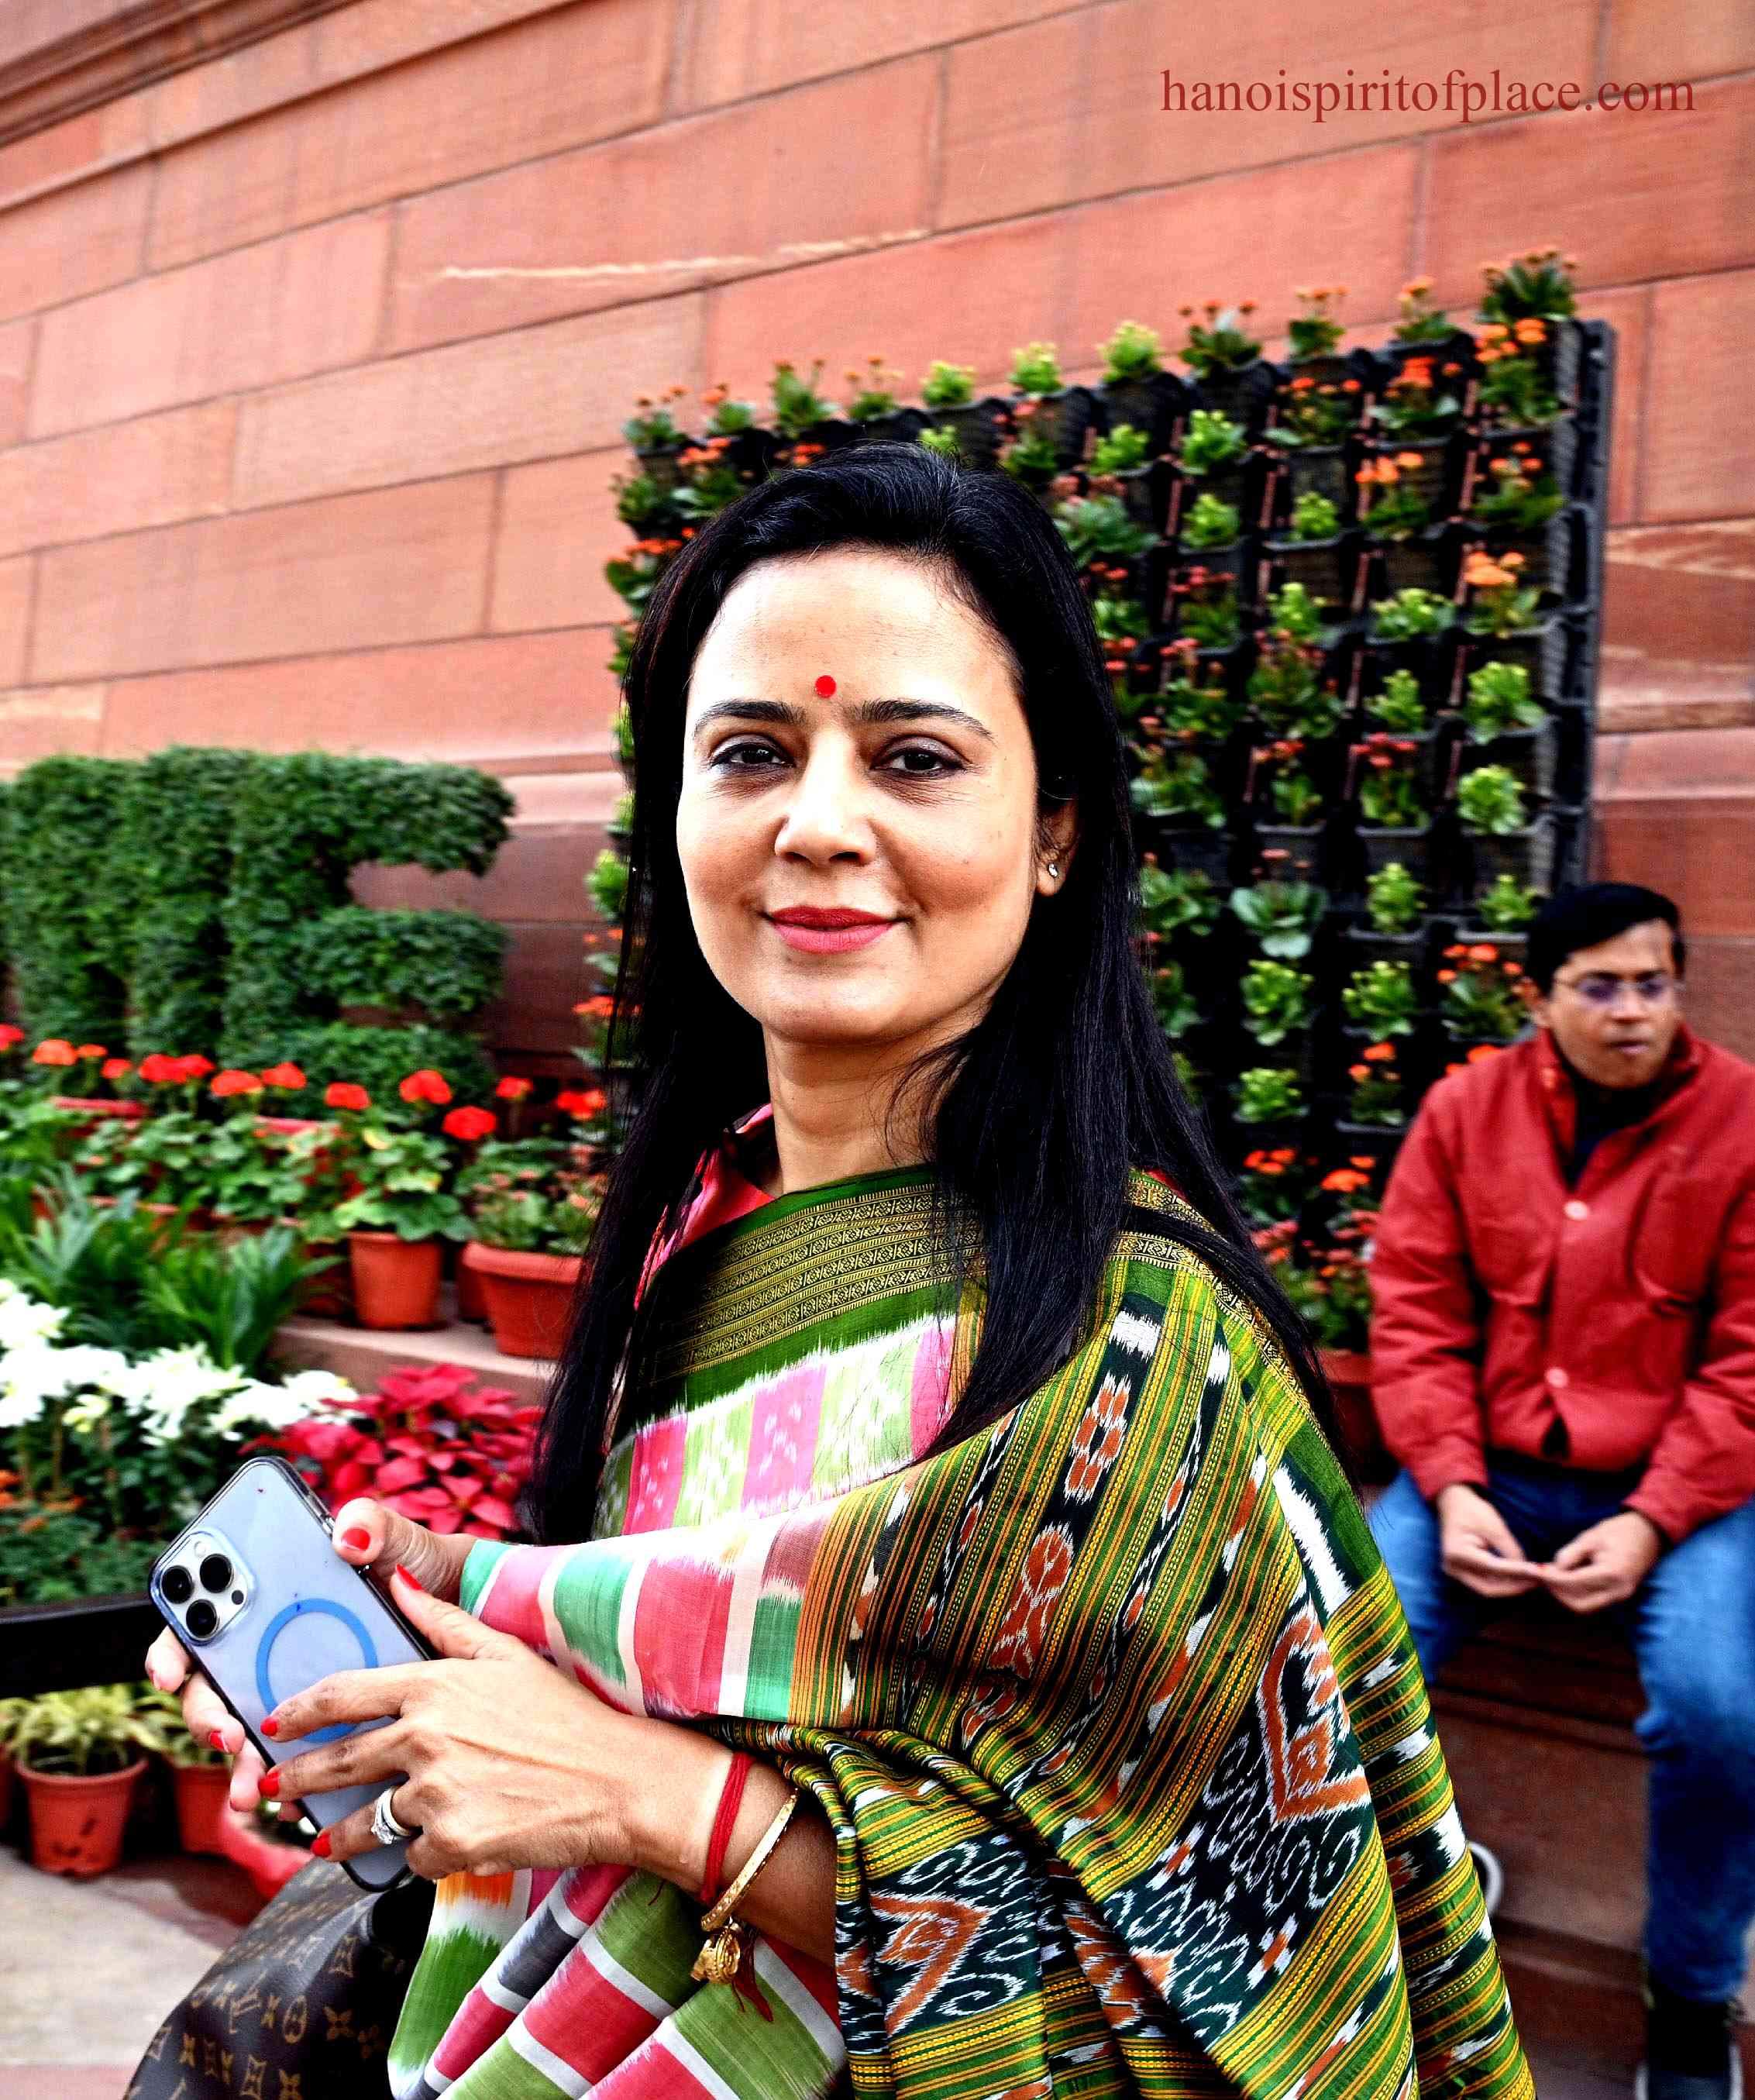 Inspirational Mahua Moitra Quotes: A Glimpse into Her Vision